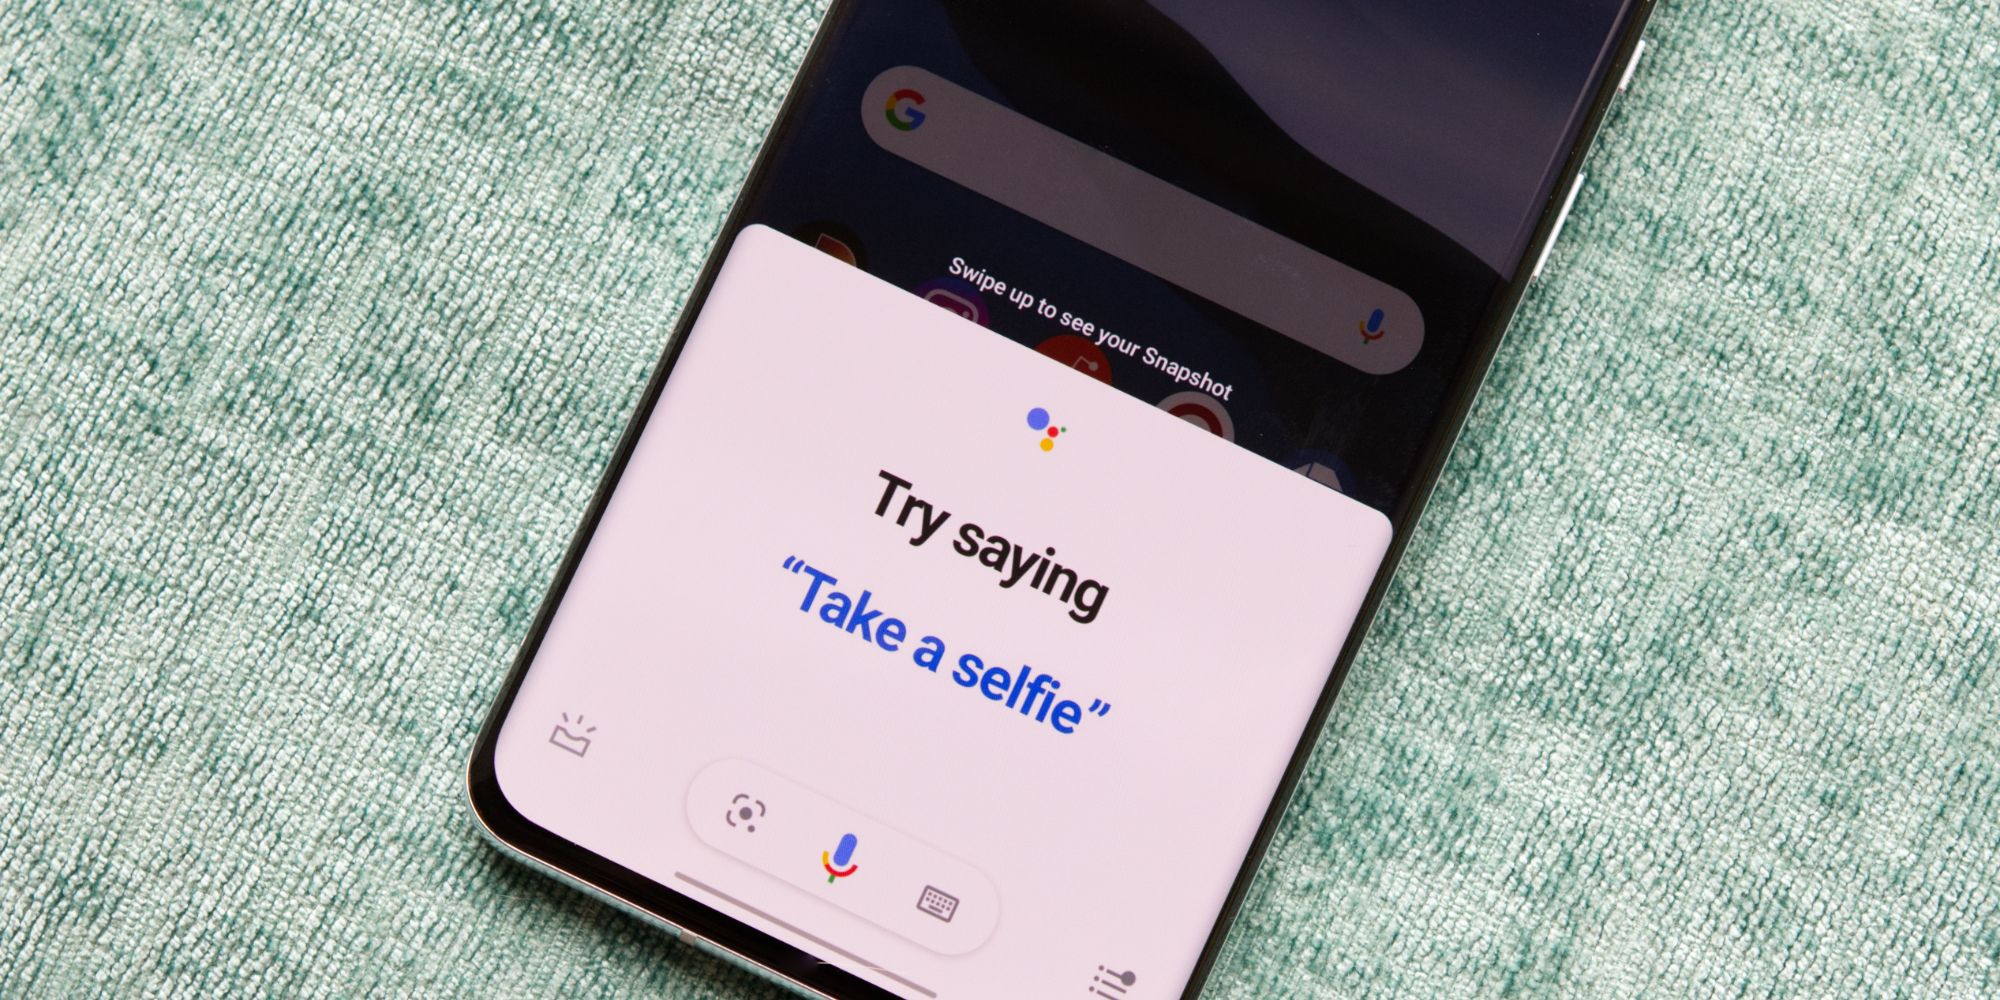 Google Assistant being used on an Android phone